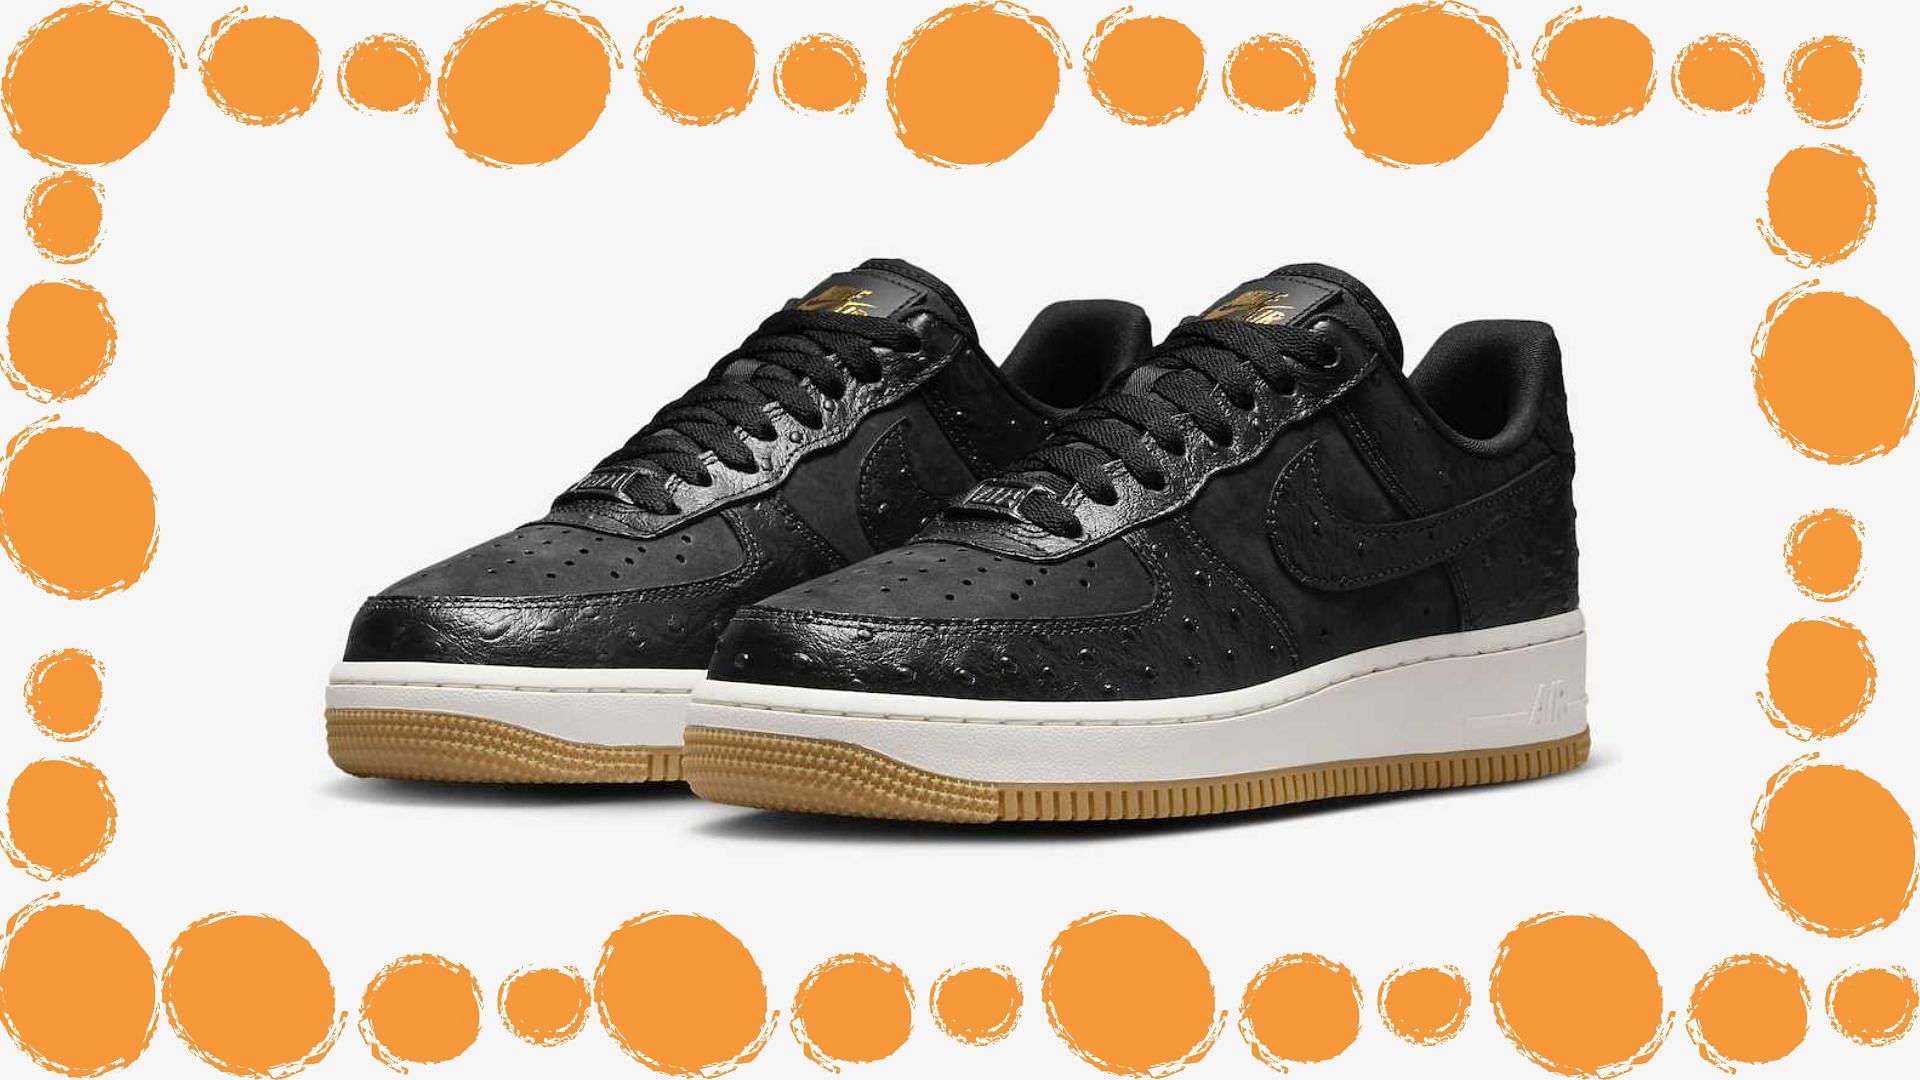 Nike Air Force 1 Low Black Ostrich sneakers (Image via Twitter/@solefeenx)